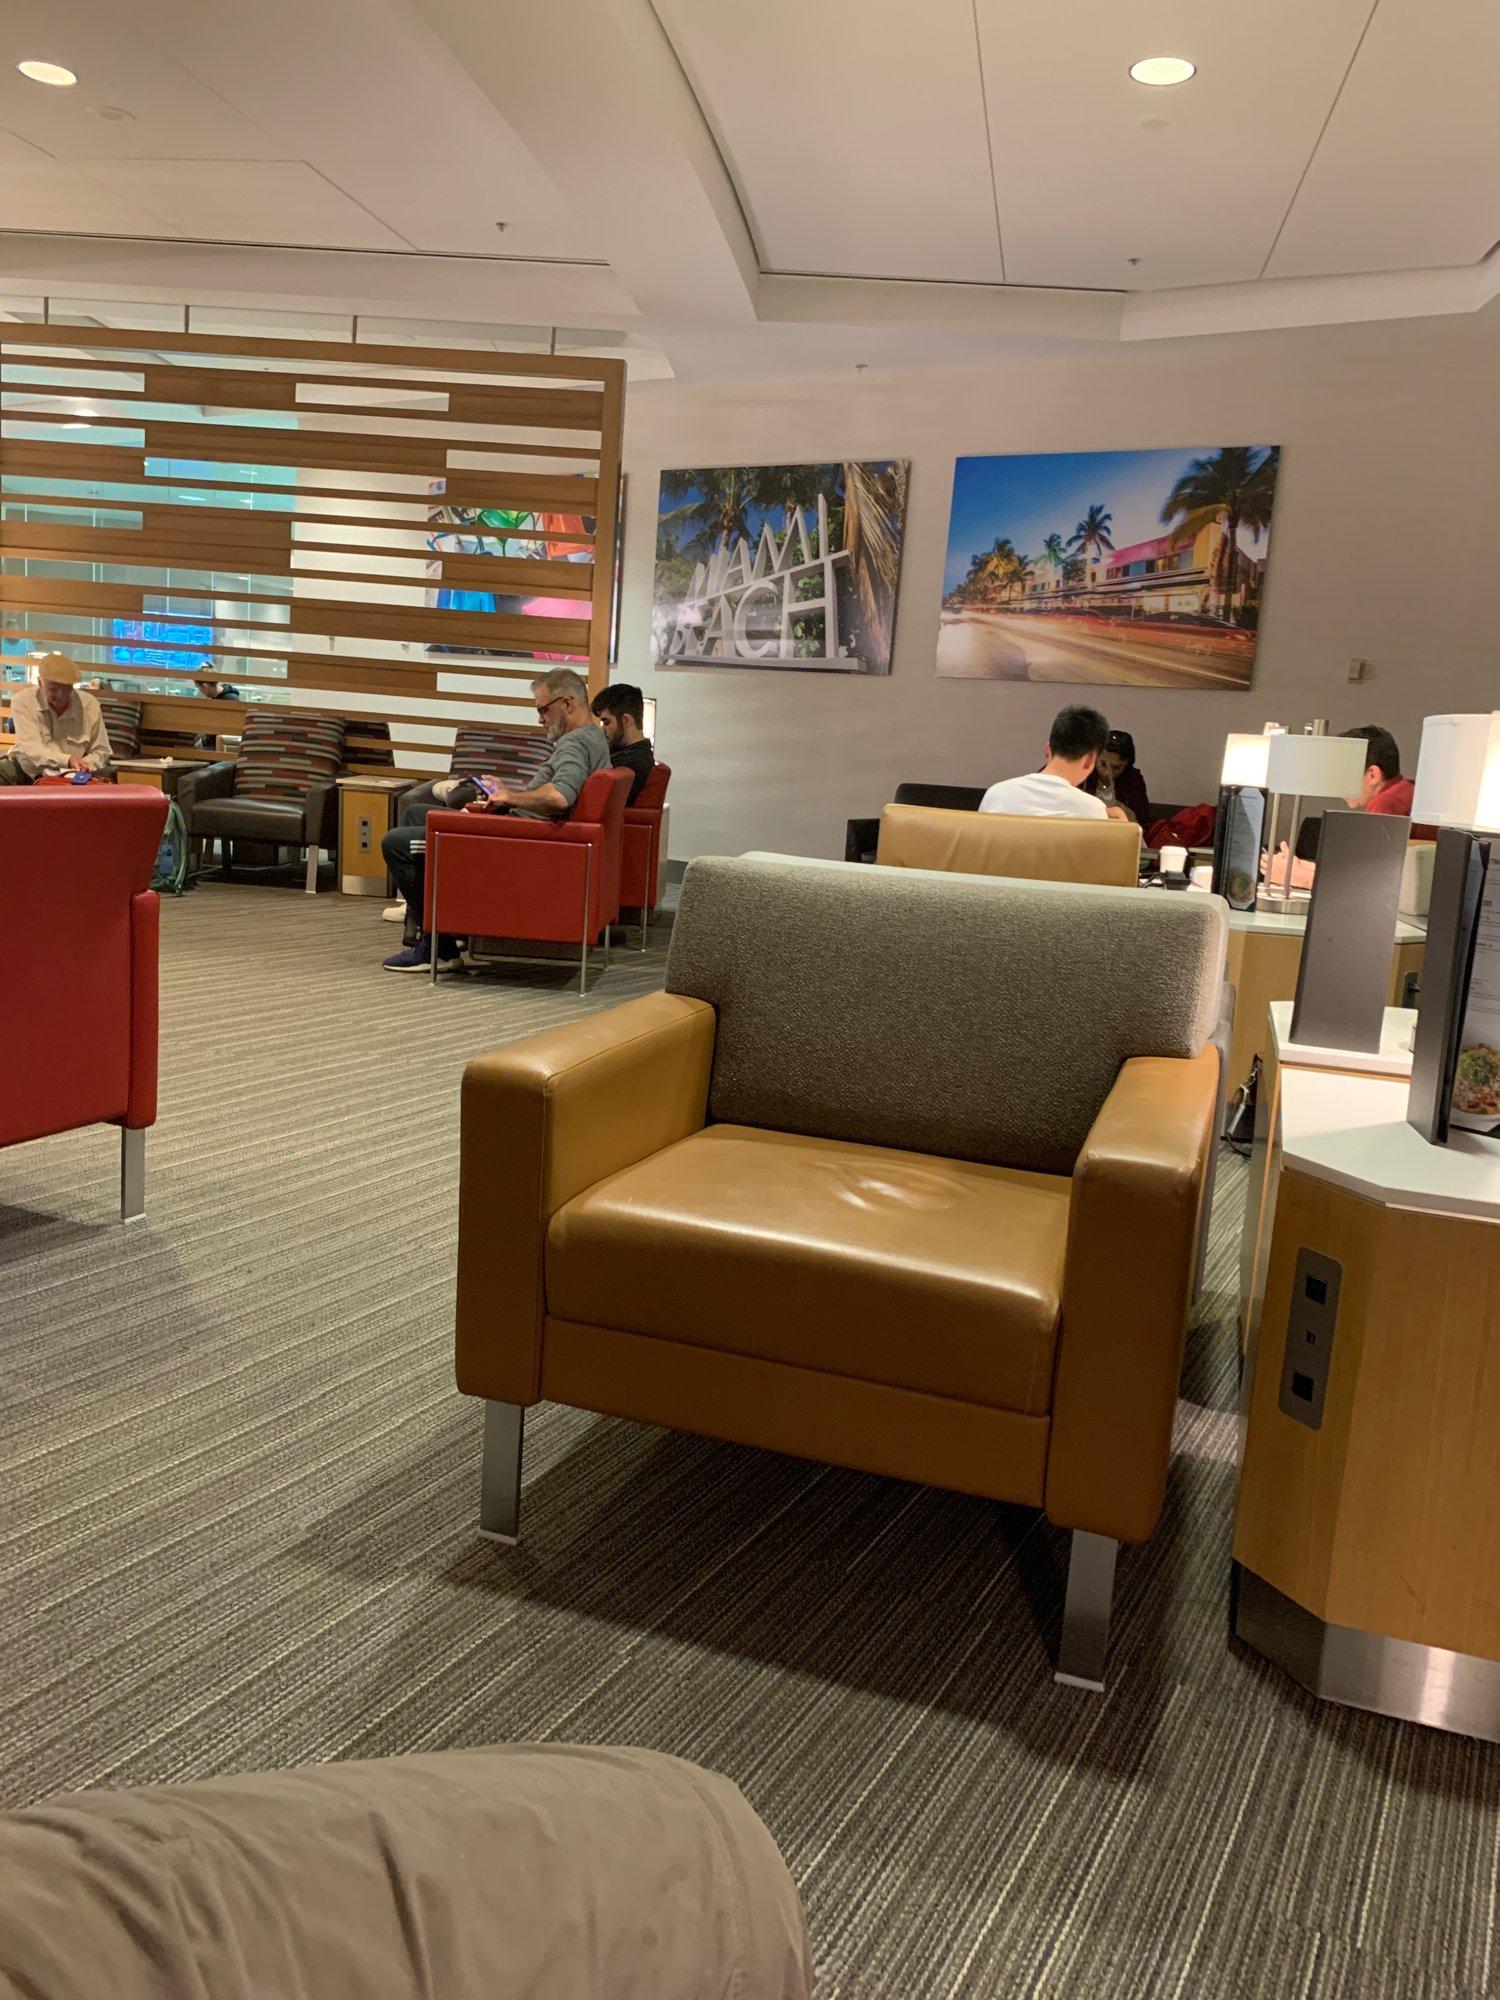 American Airlines Admirals Club (Gate D30) image 5 of 7